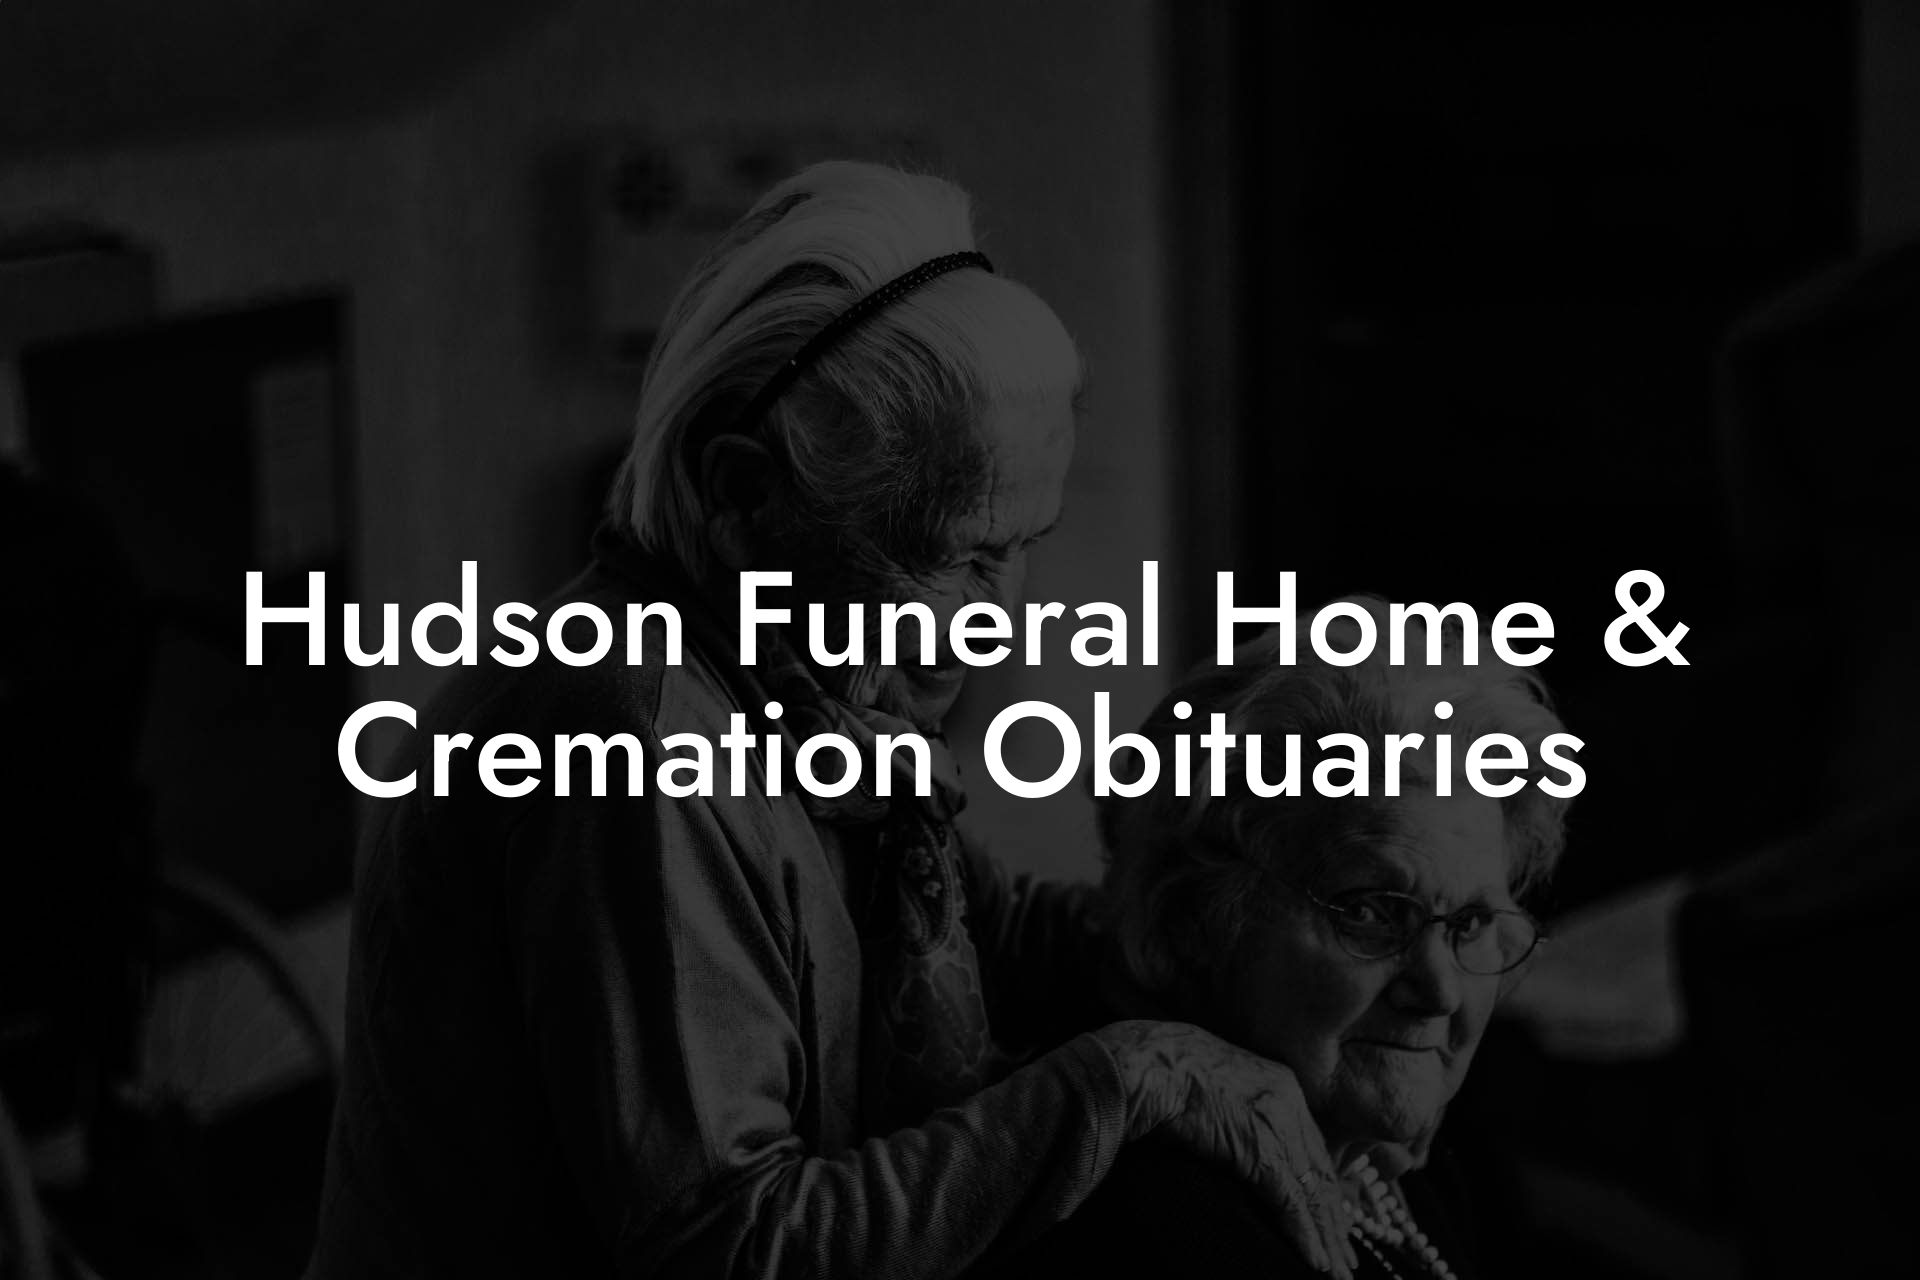 Hudson Funeral Home & Cremation Obituaries - Eulogy Assistant